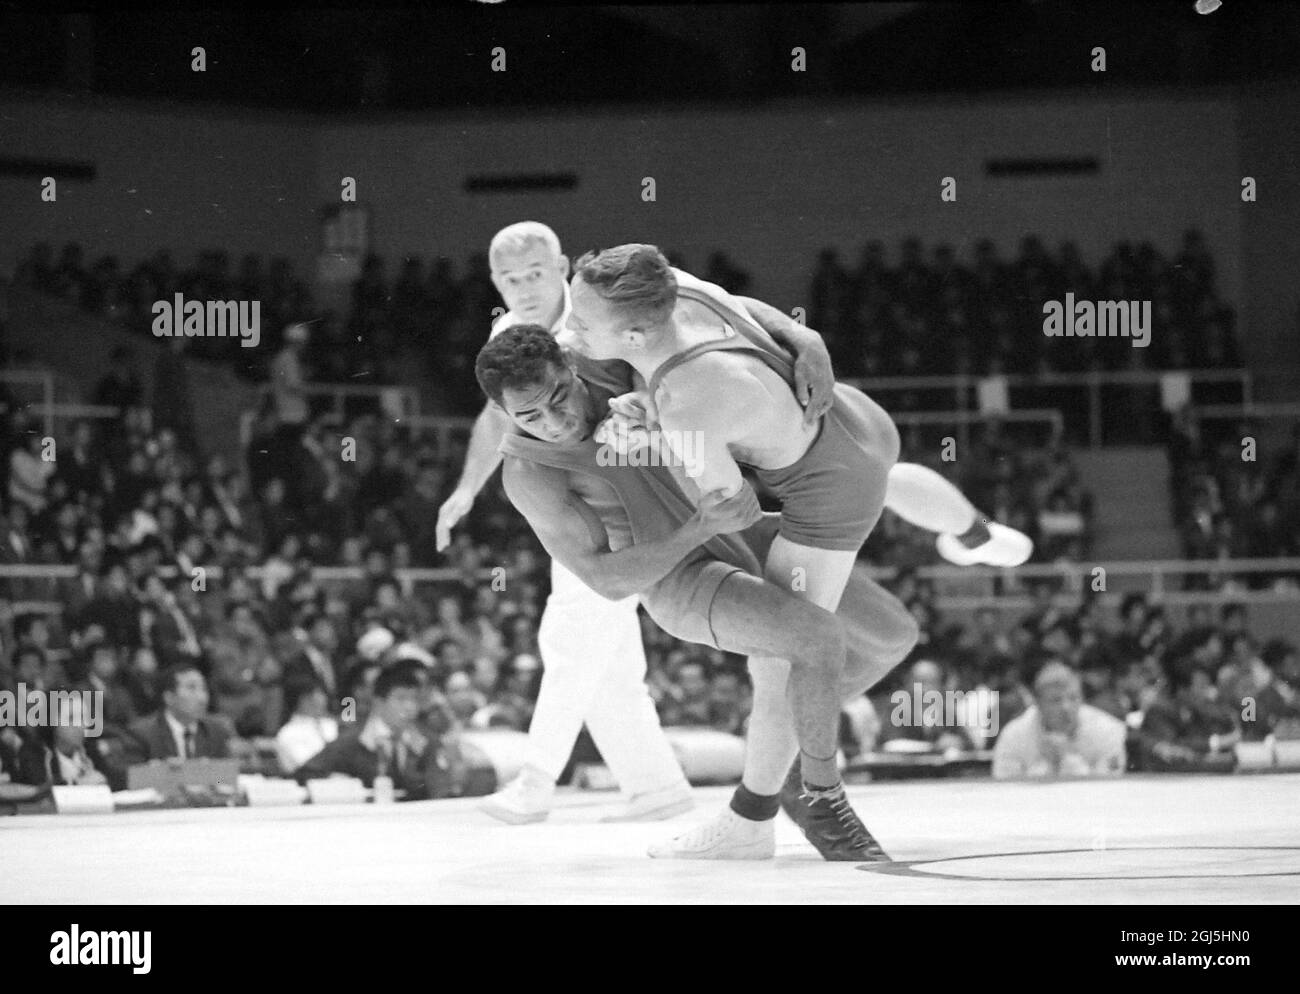 OLYMPICS, OLYMPIC SPORT GAMES - THE XVIII 18TH OLYMPIAD IN TOKYO, JAPAN - WRESTLING OLYMPICS CACAS V BALLERY BALLERY WON  ;  20 OCTOBER 1964 Stock Photo